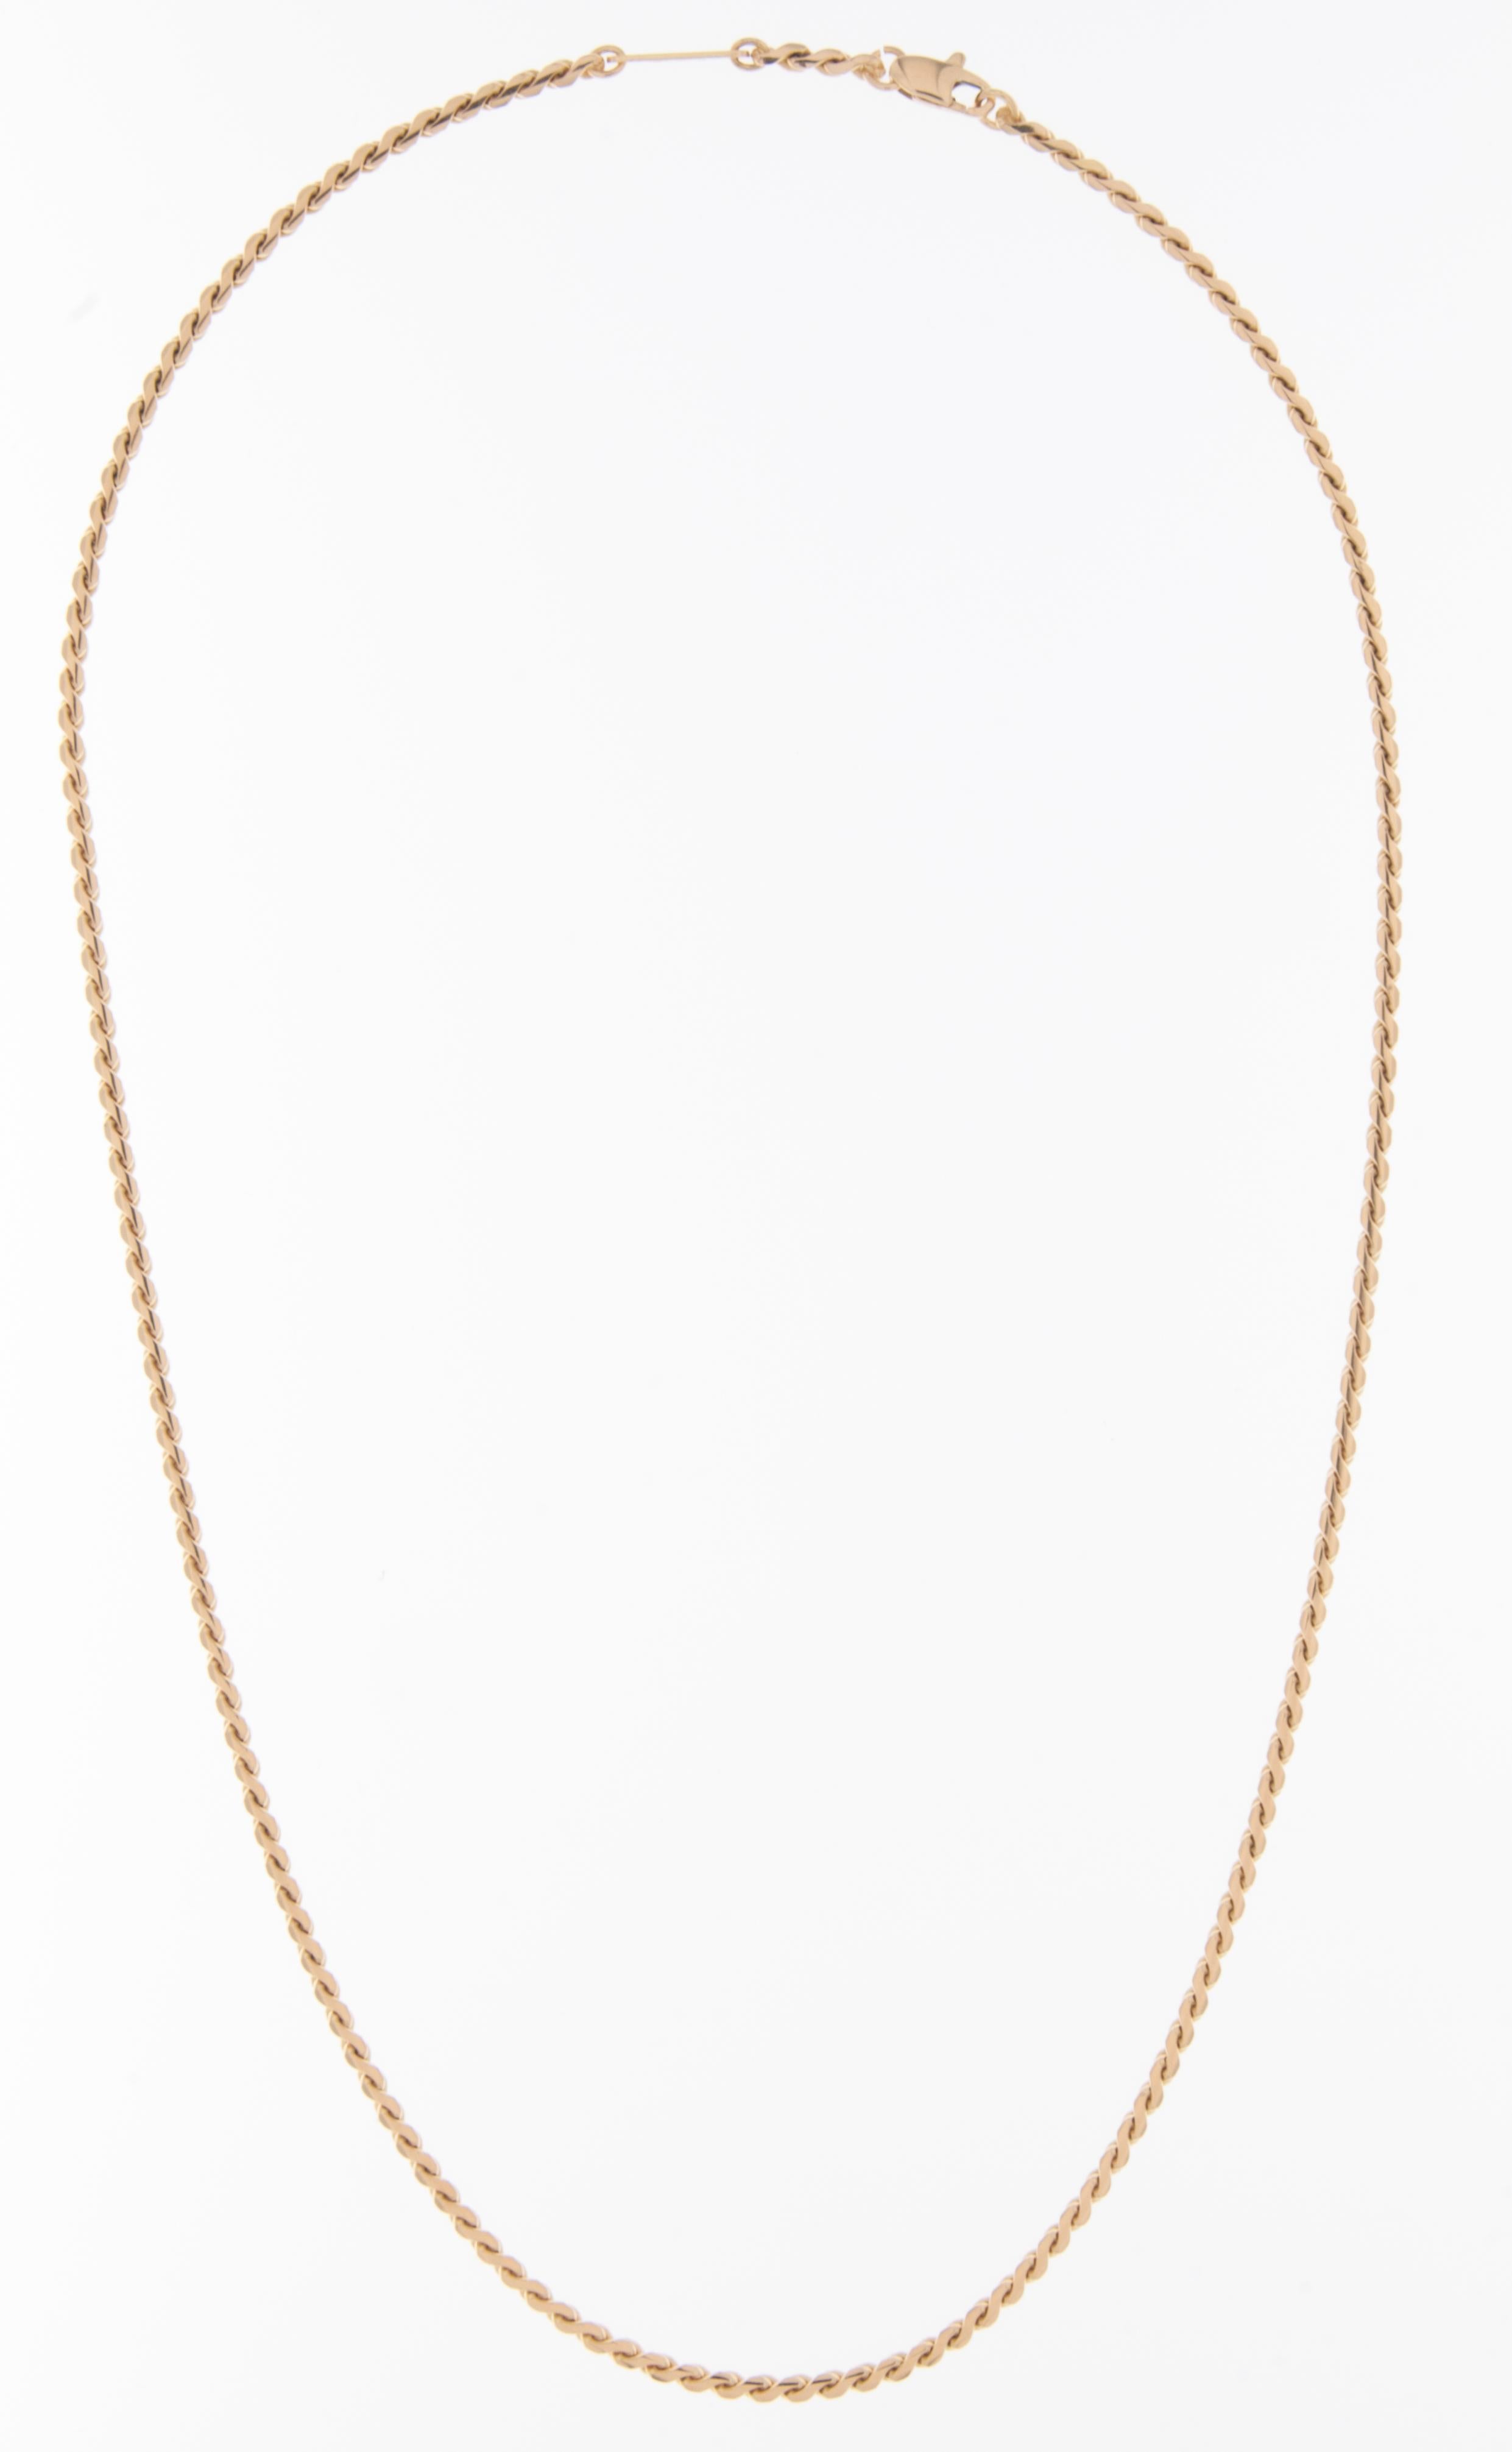 The CARTIER 18kt Yellow Gold Chain is a testament to timeless elegance and understated luxury. Crafted with meticulous attention to detail, this chain exudes sophistication in its simplicity.

Fashioned from 18kt yellow gold, the chain radiates a